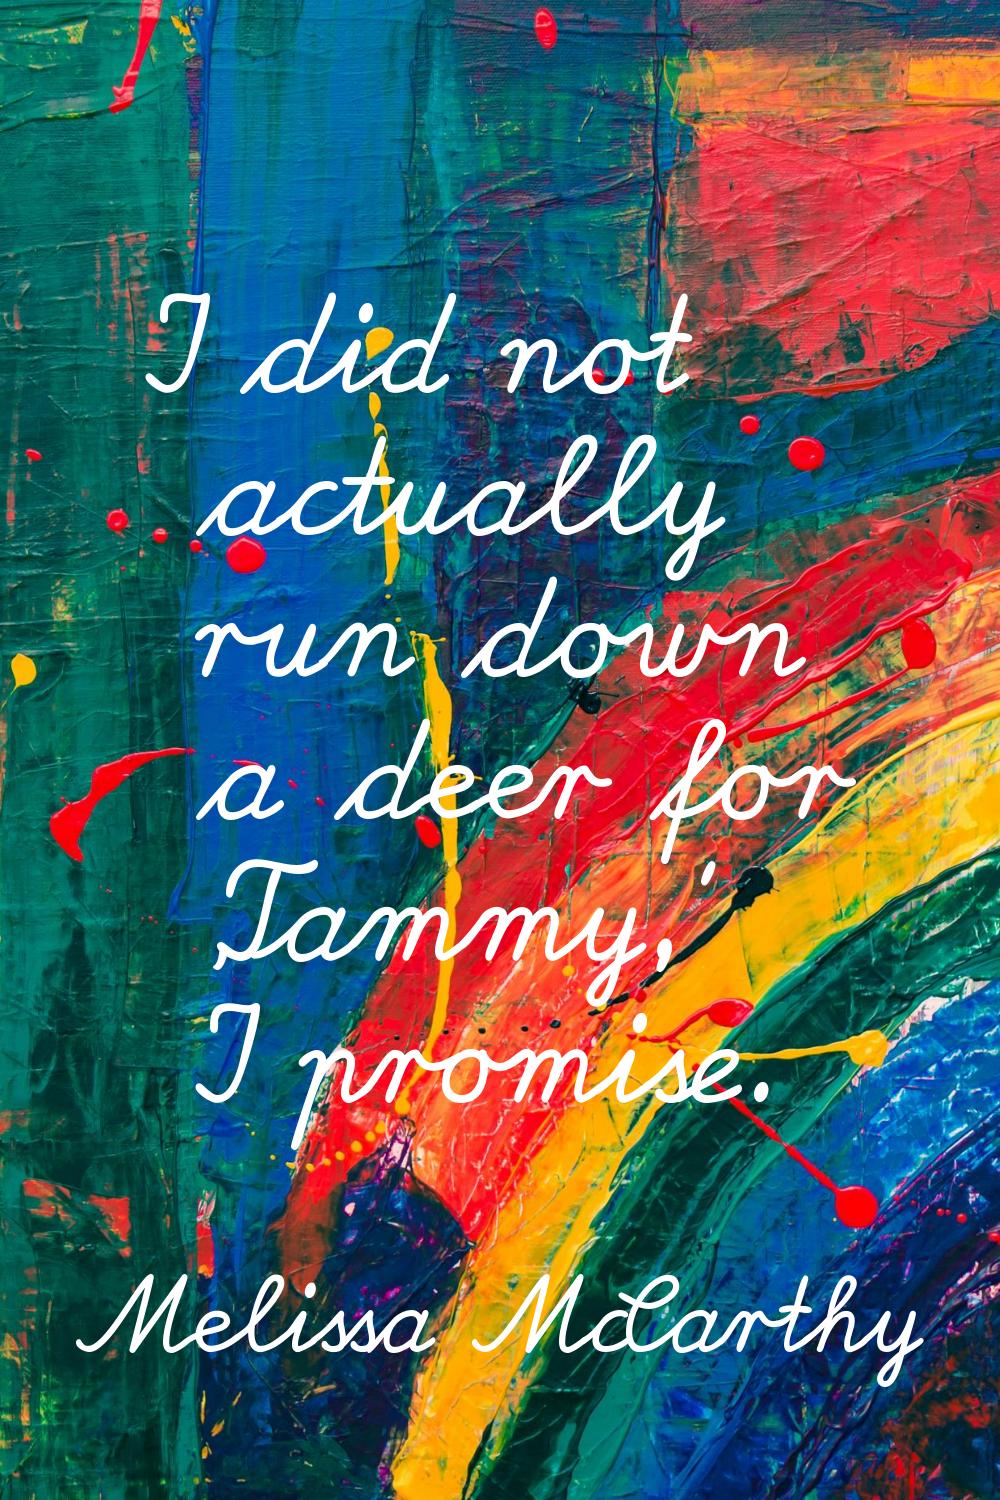 I did not actually run down a deer for 'Tammy,' I promise.